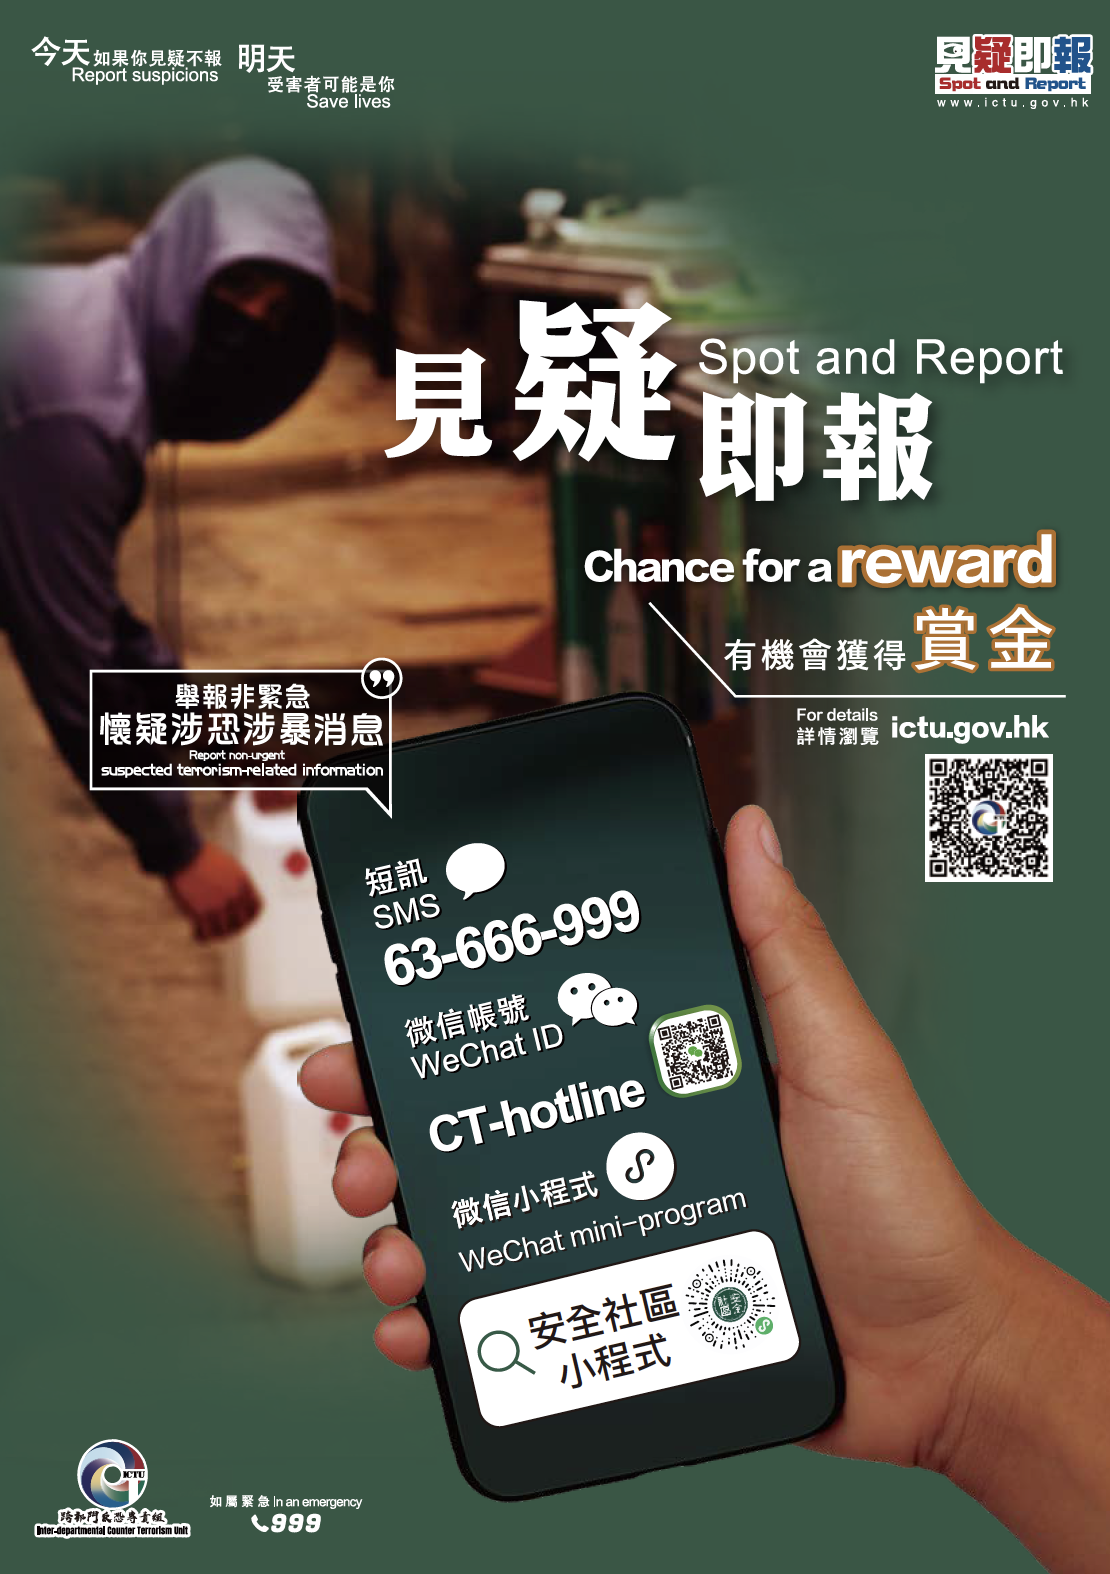 “Spot and Report – Counter-terrorism Reporting Hotline and Counter-terrorism Reward” Poster